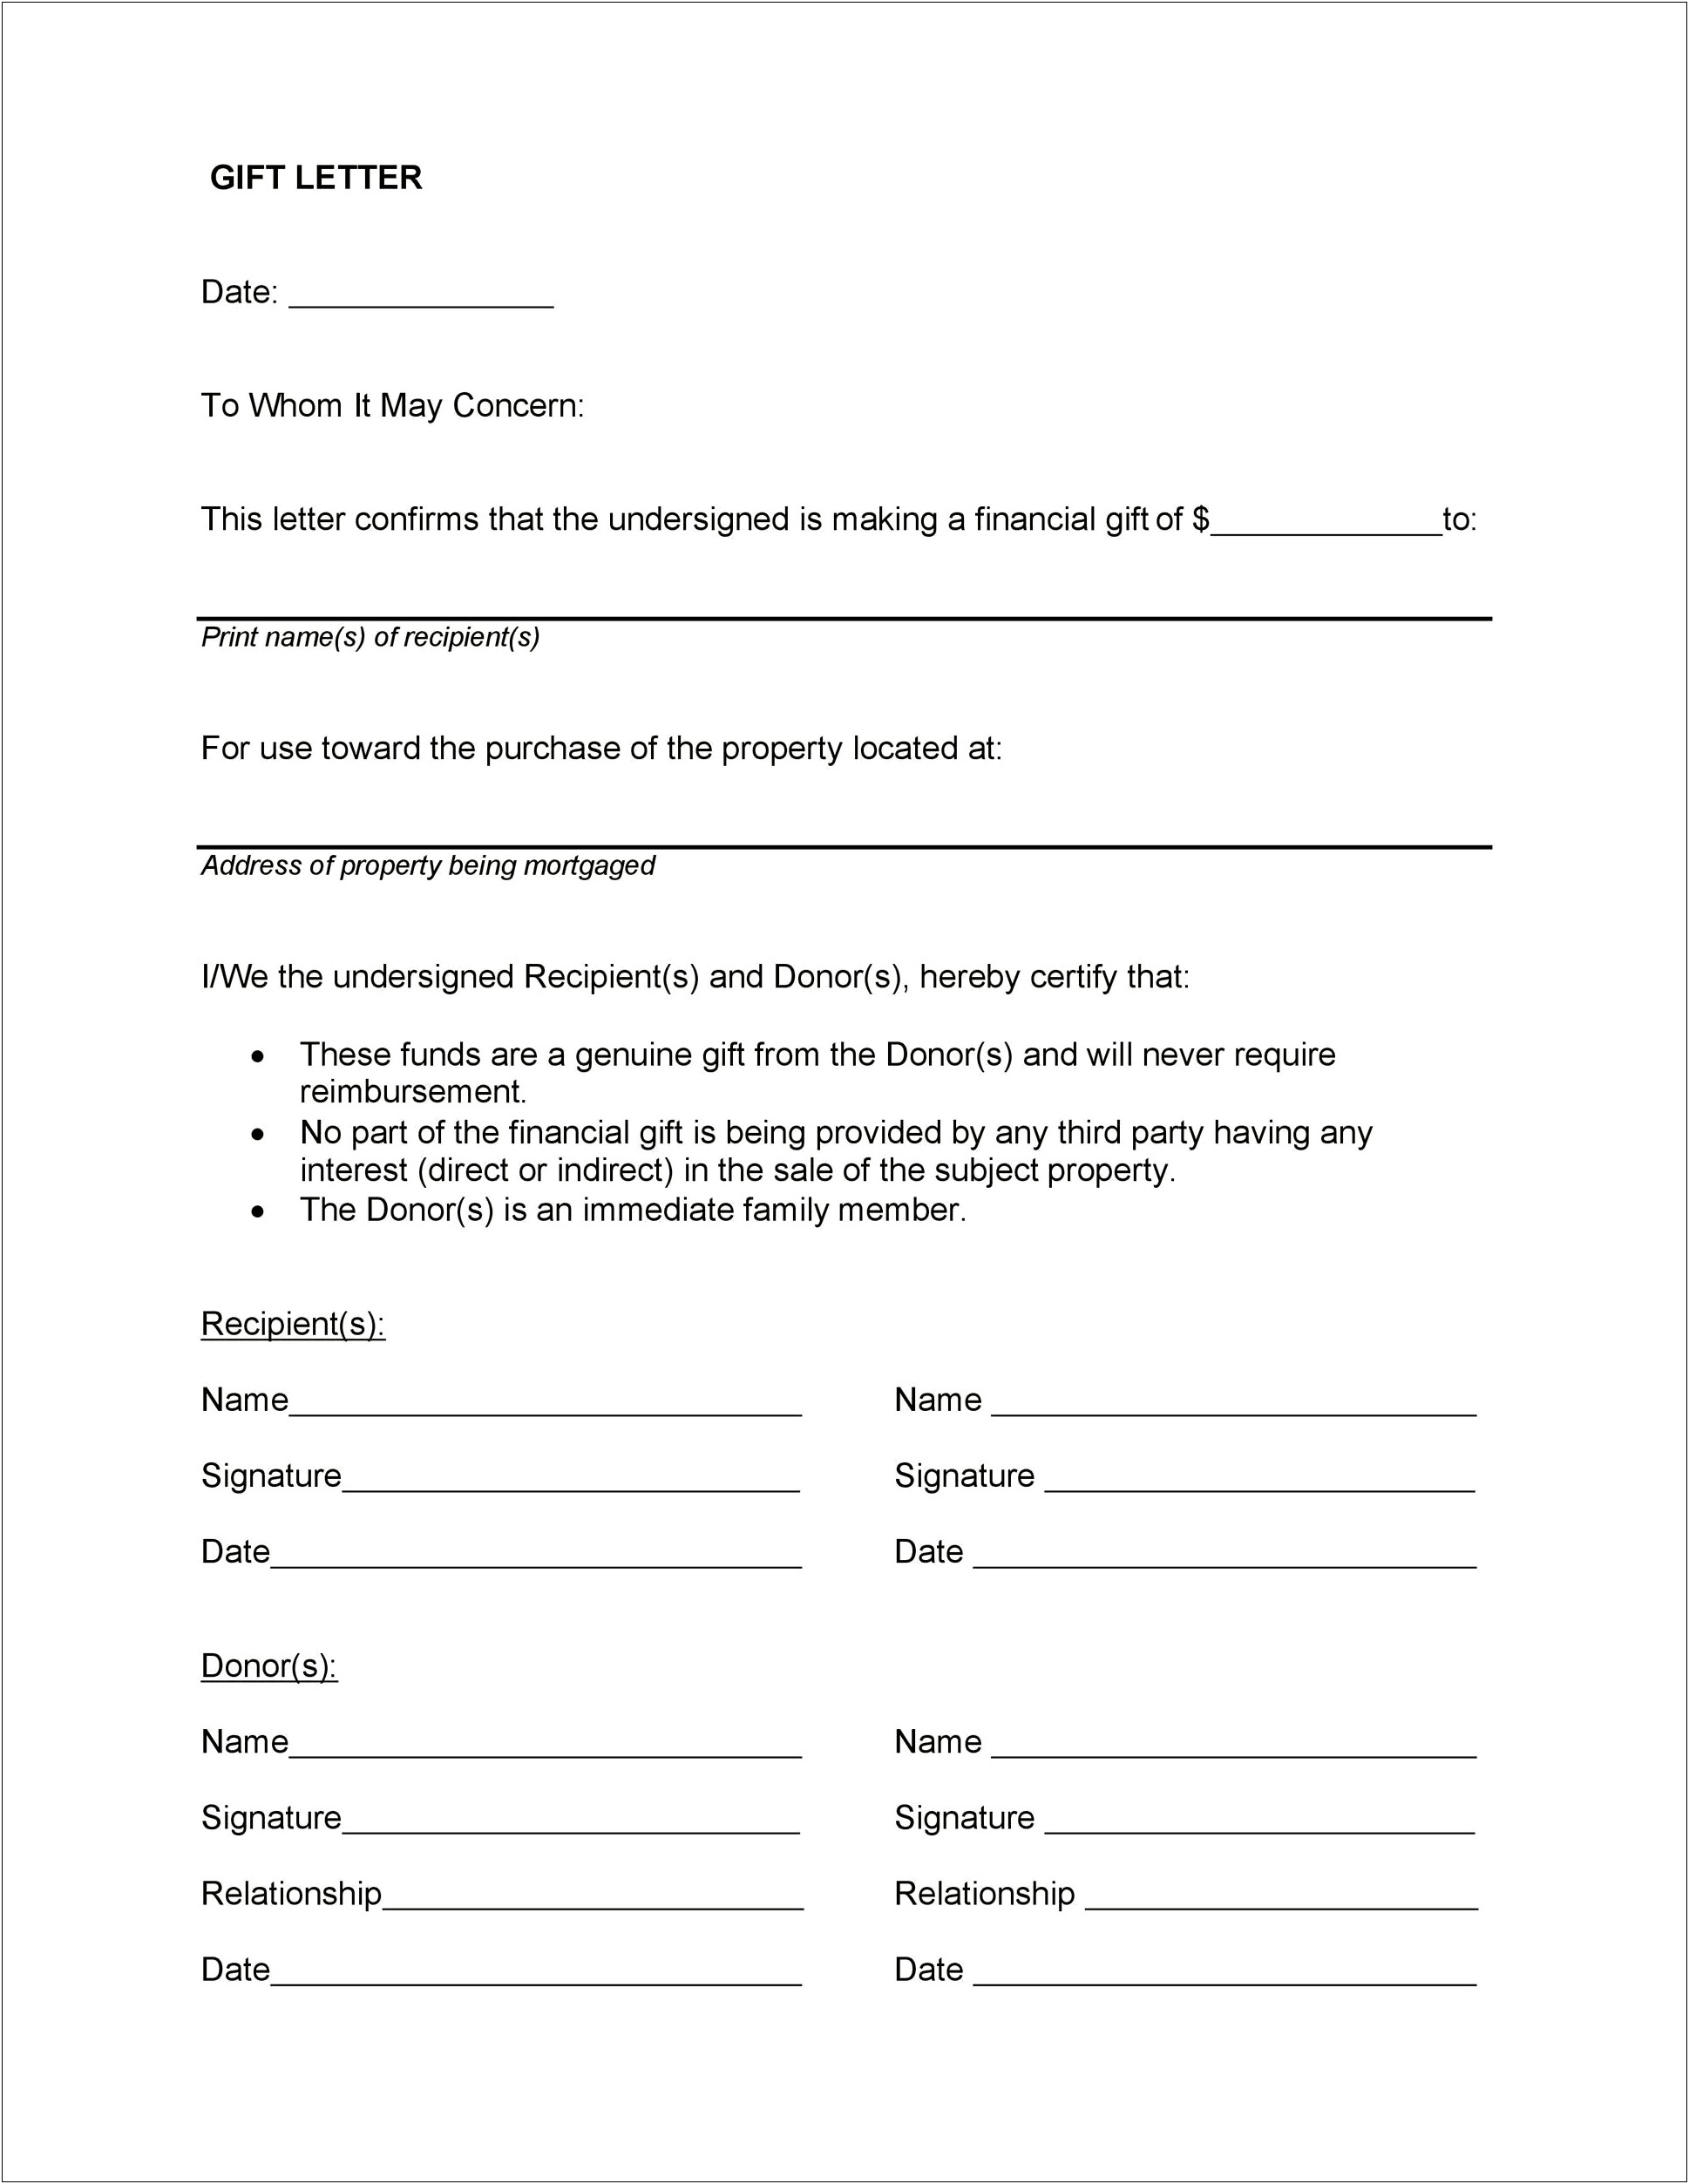 Gift Of Equity Gift Letter Template